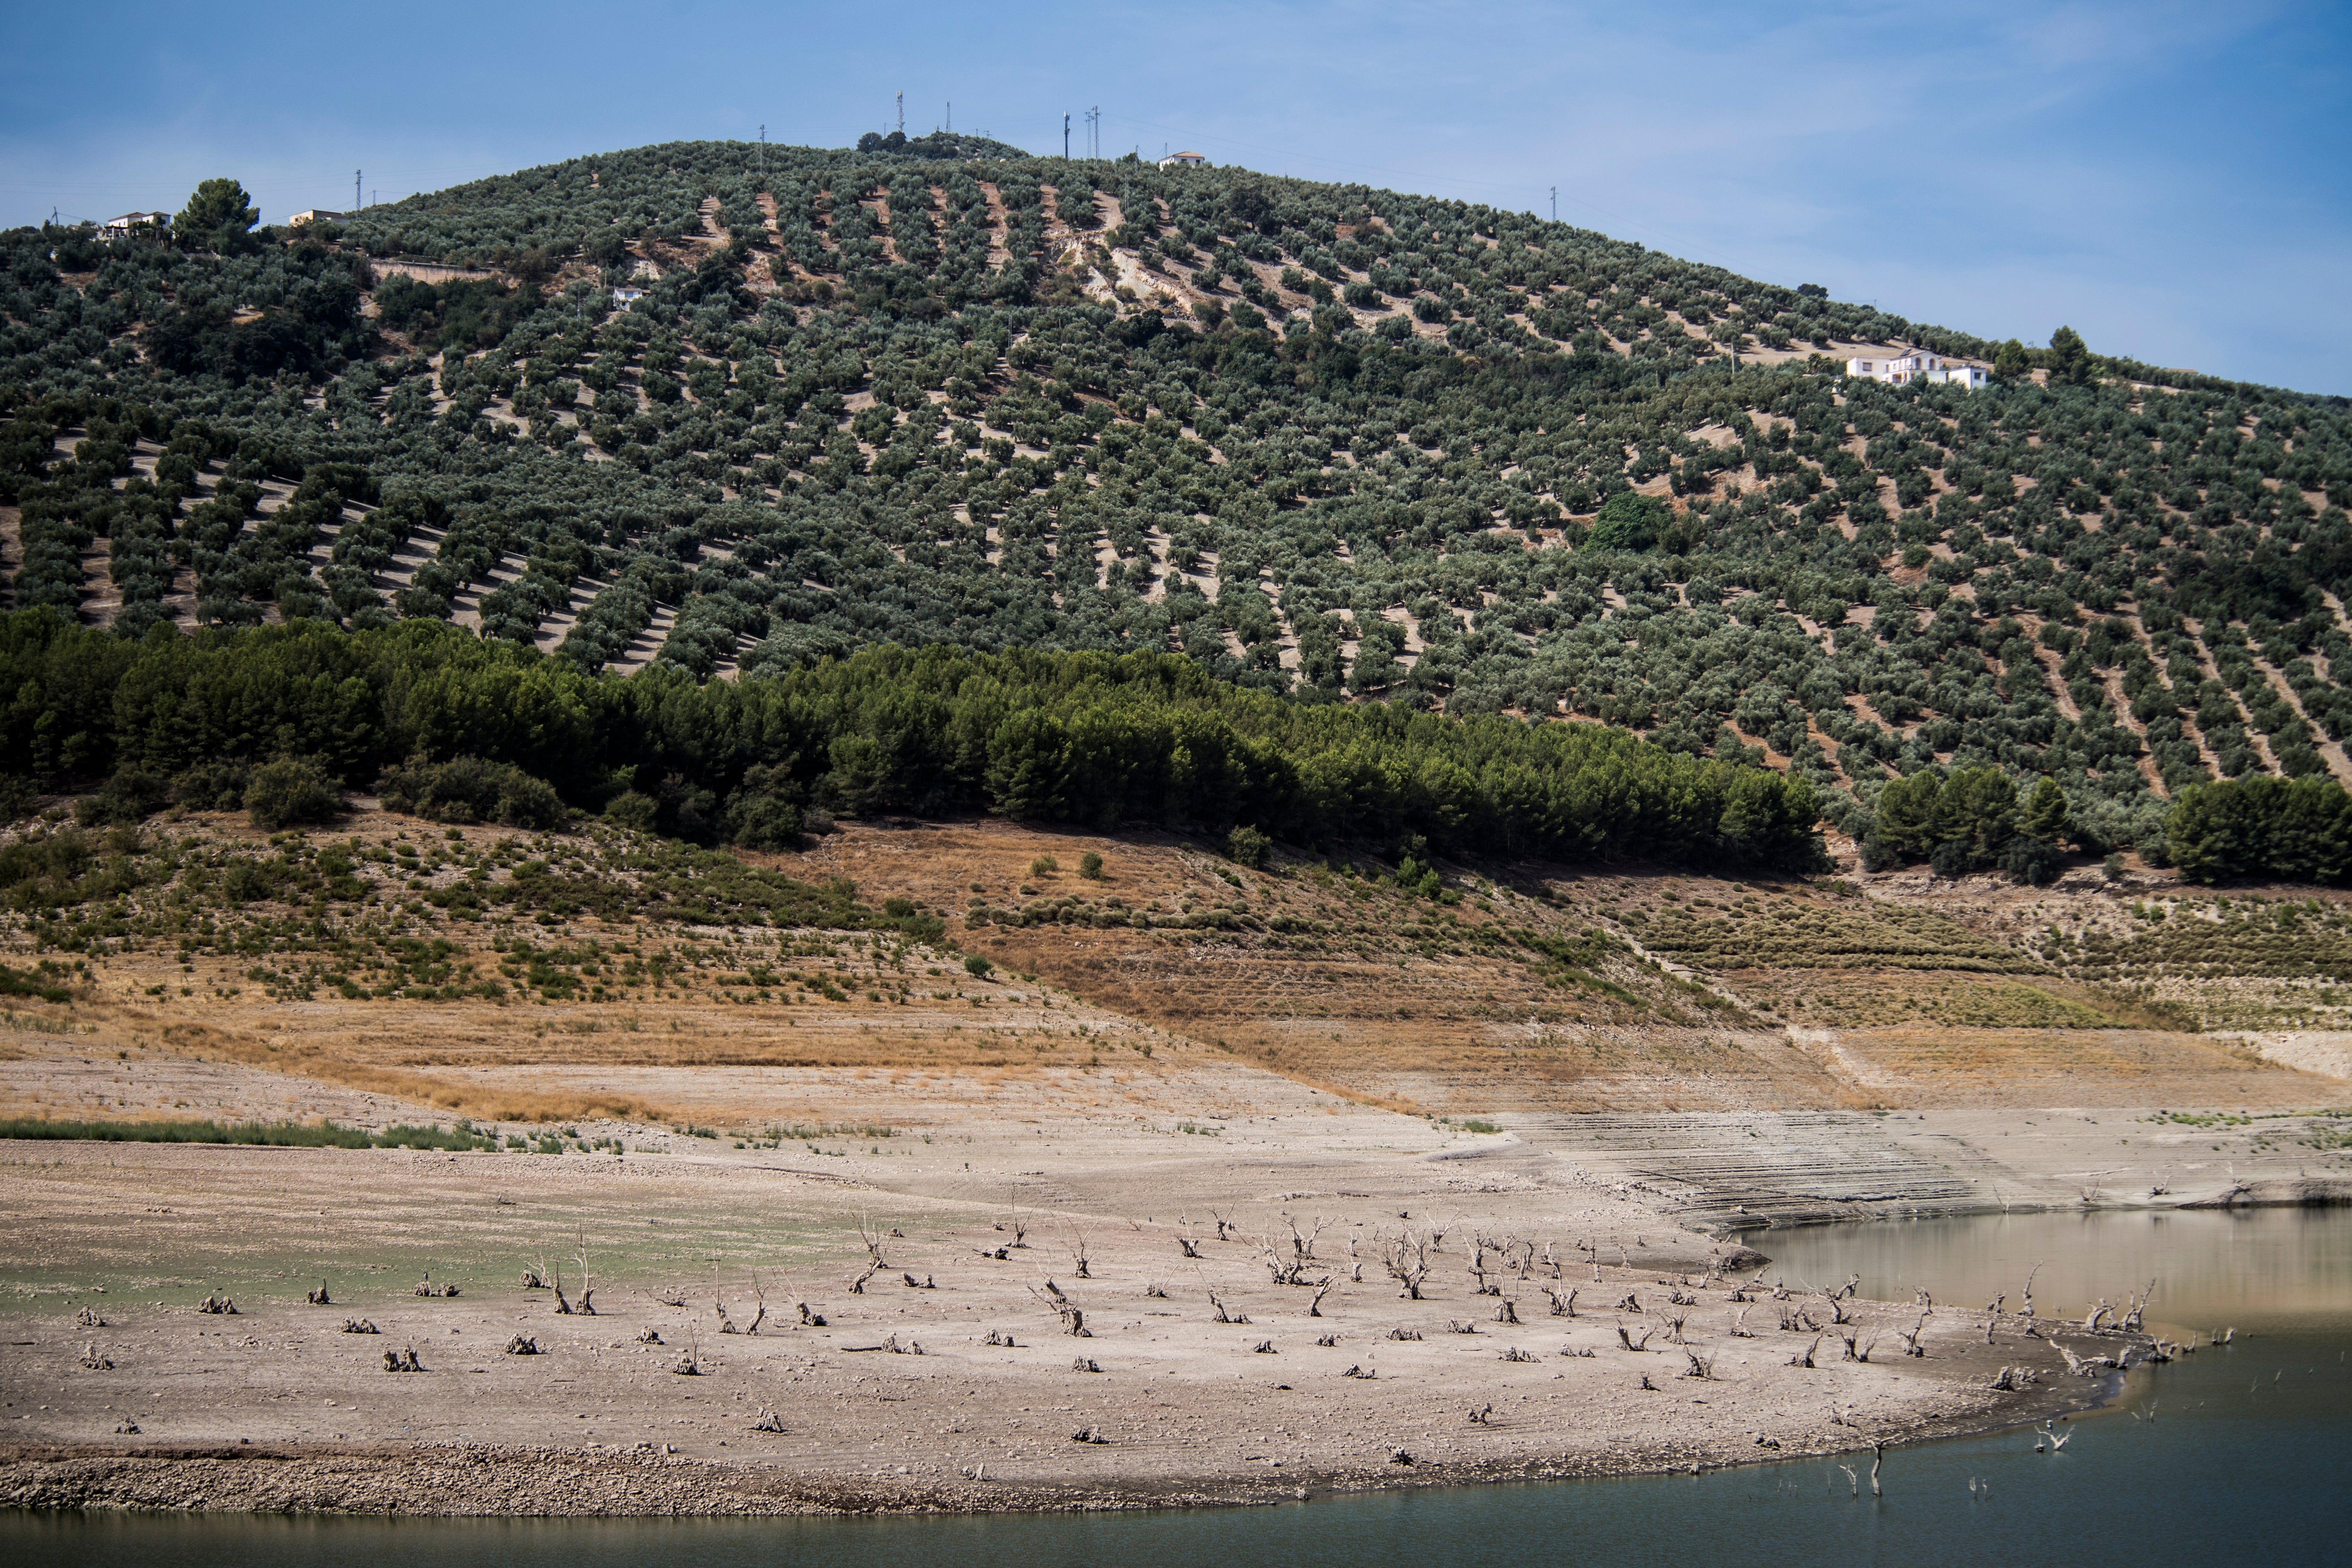 Rows of olive trees next to the Iznájar reservoir in Andalusia. (Photo: Carlos Gil, Getty Images)